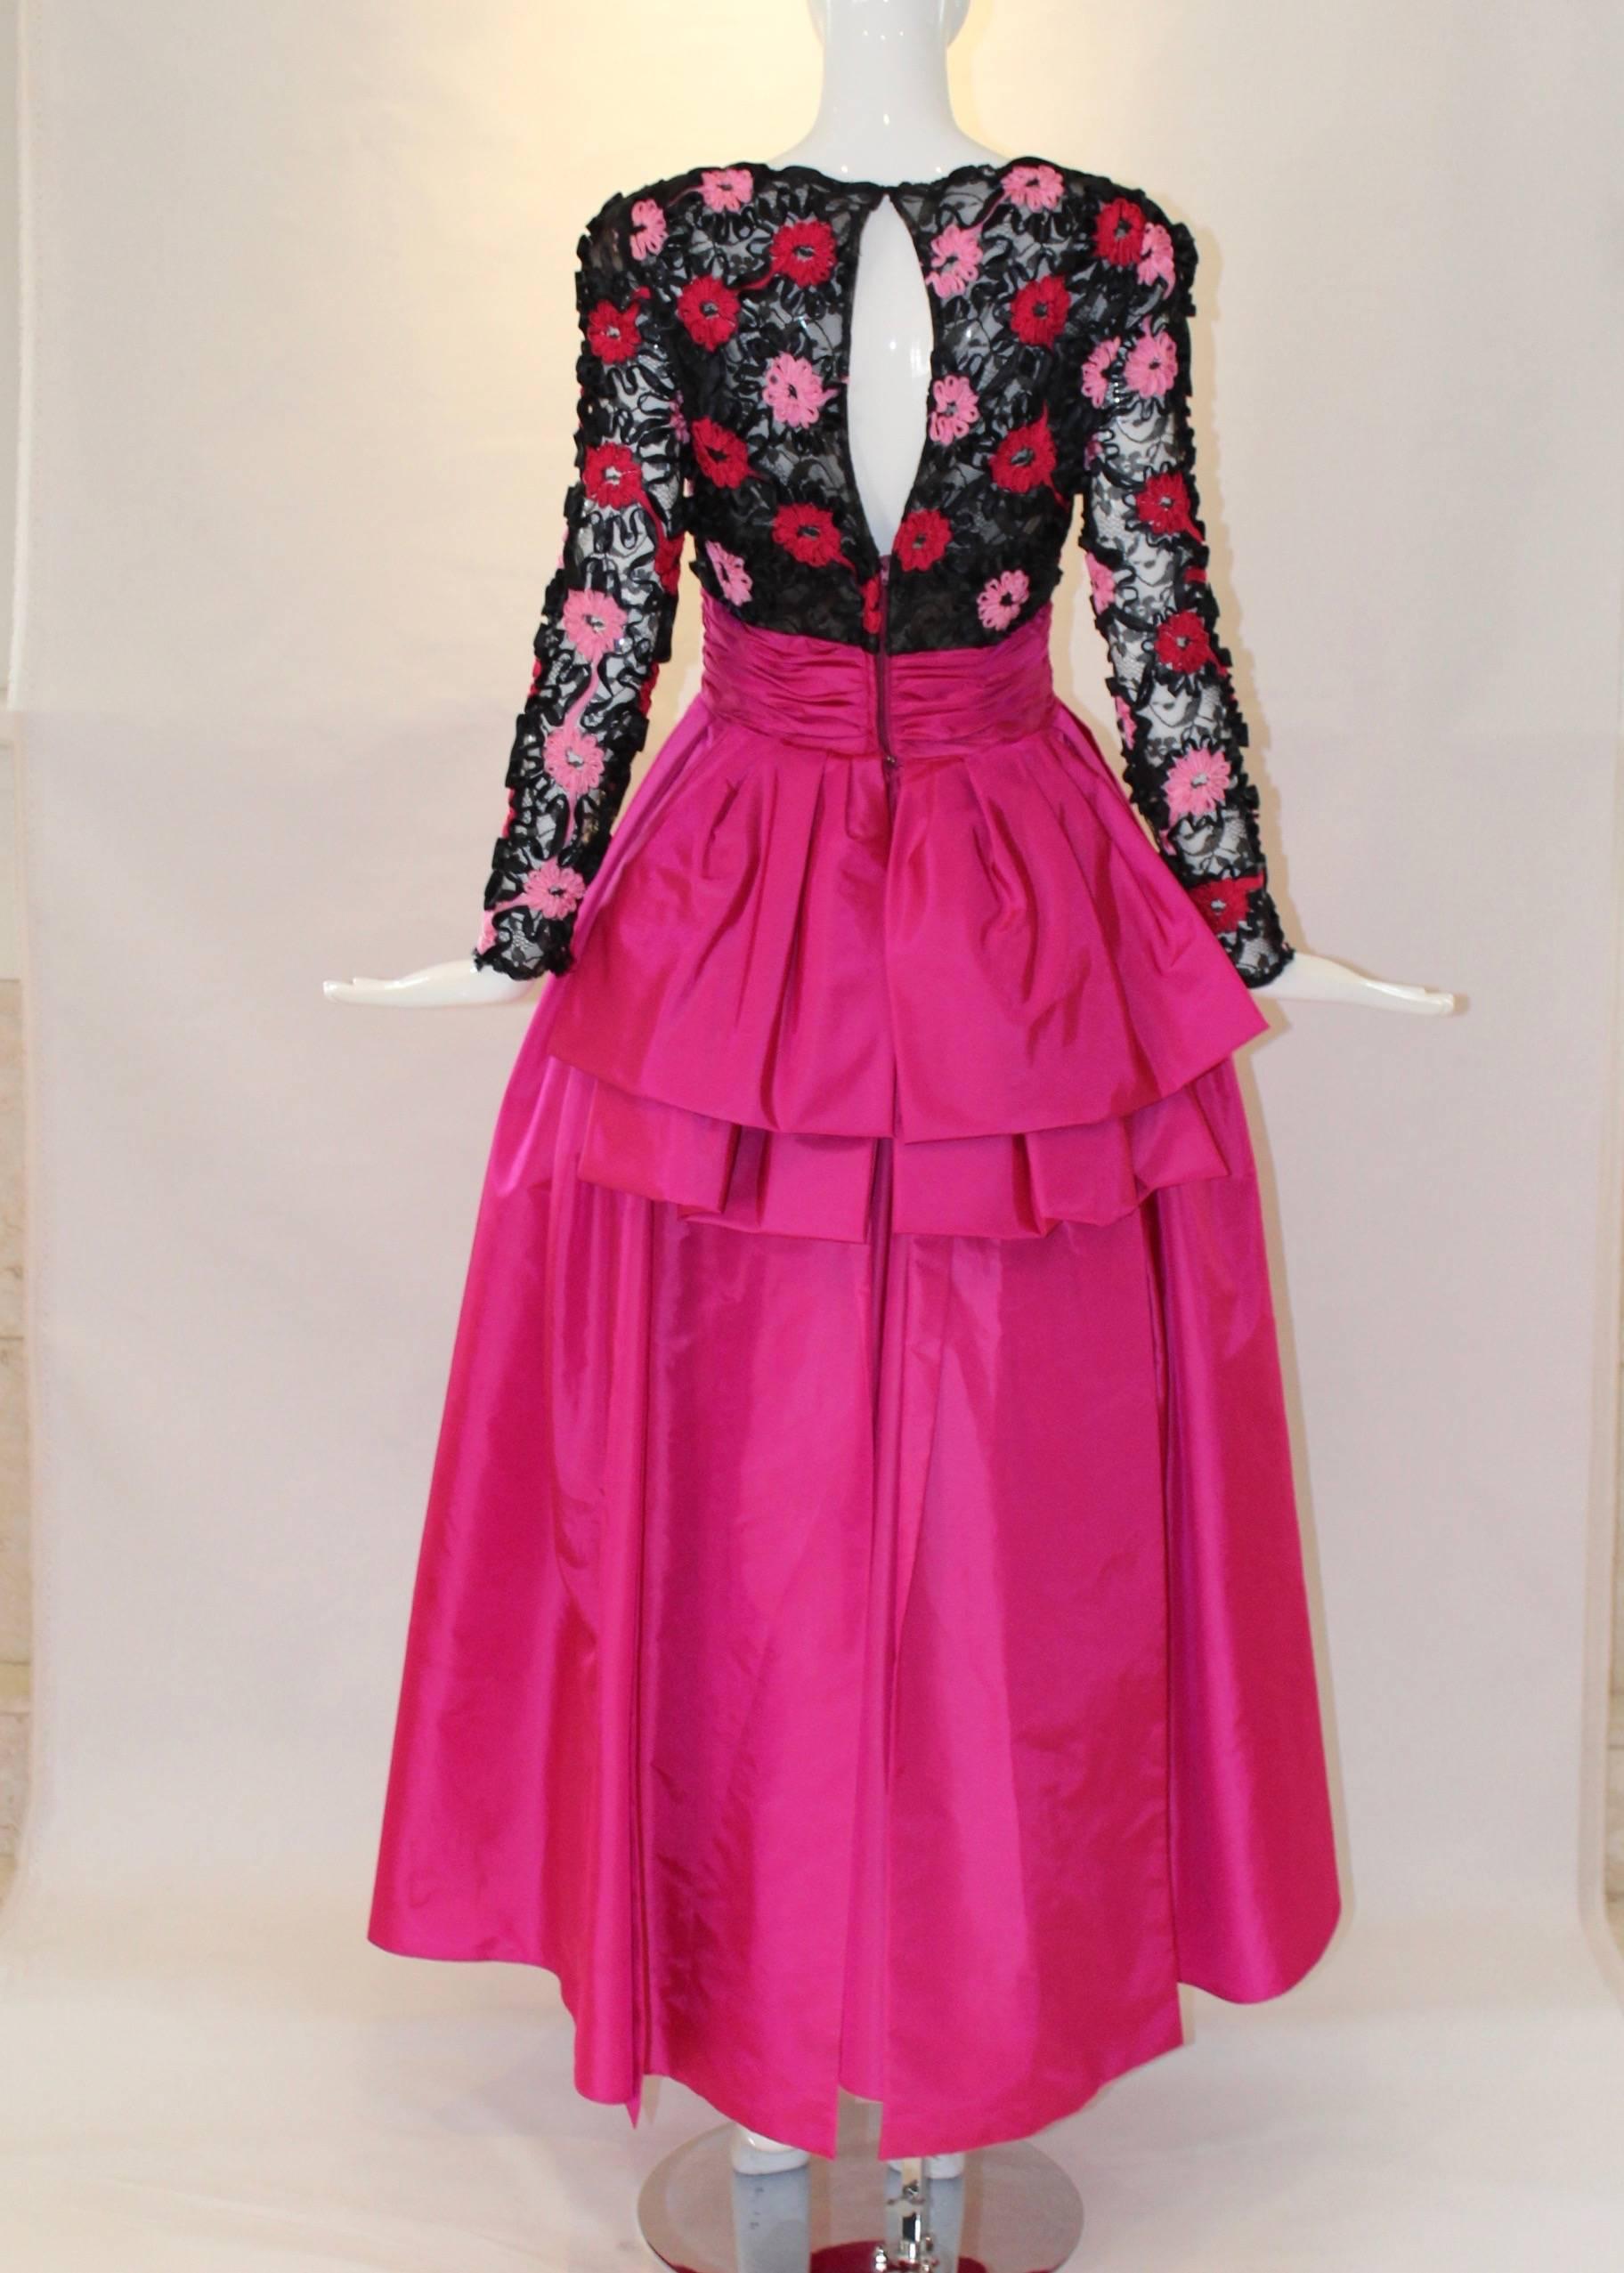 This head-turning 1980s Victor Costa ball gown has a sheer ribbon weave floral bodice and is fitted at the waist. With hidden shoulder pads, a bright pink full taffeta skirt and a bow back details, this gown is ready for dancing! 
59” from shoulder